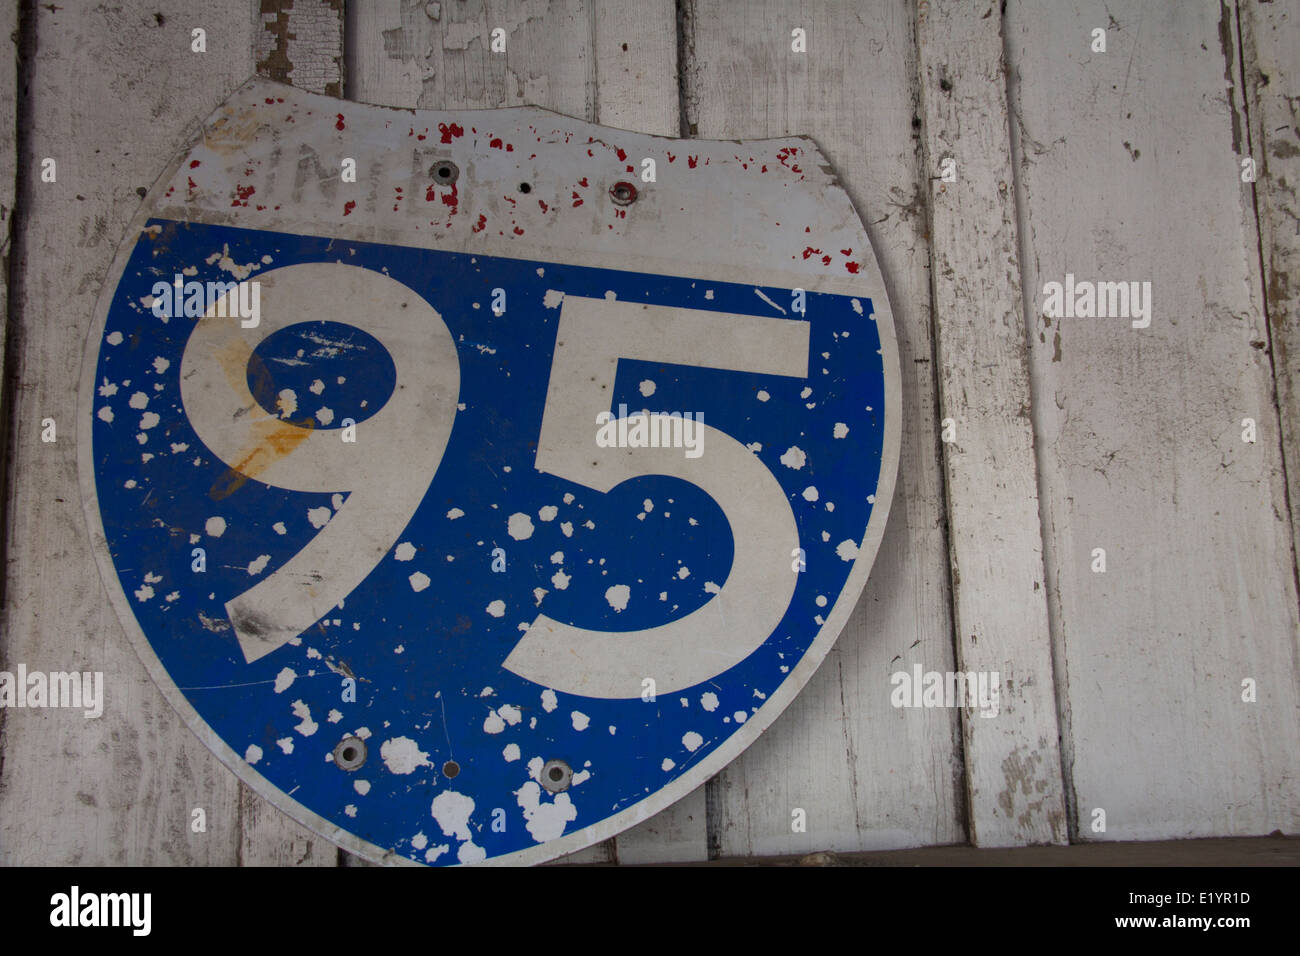 A souvenir road sign from Florida's I-95, seen in DeLand, FL. Stock Photo